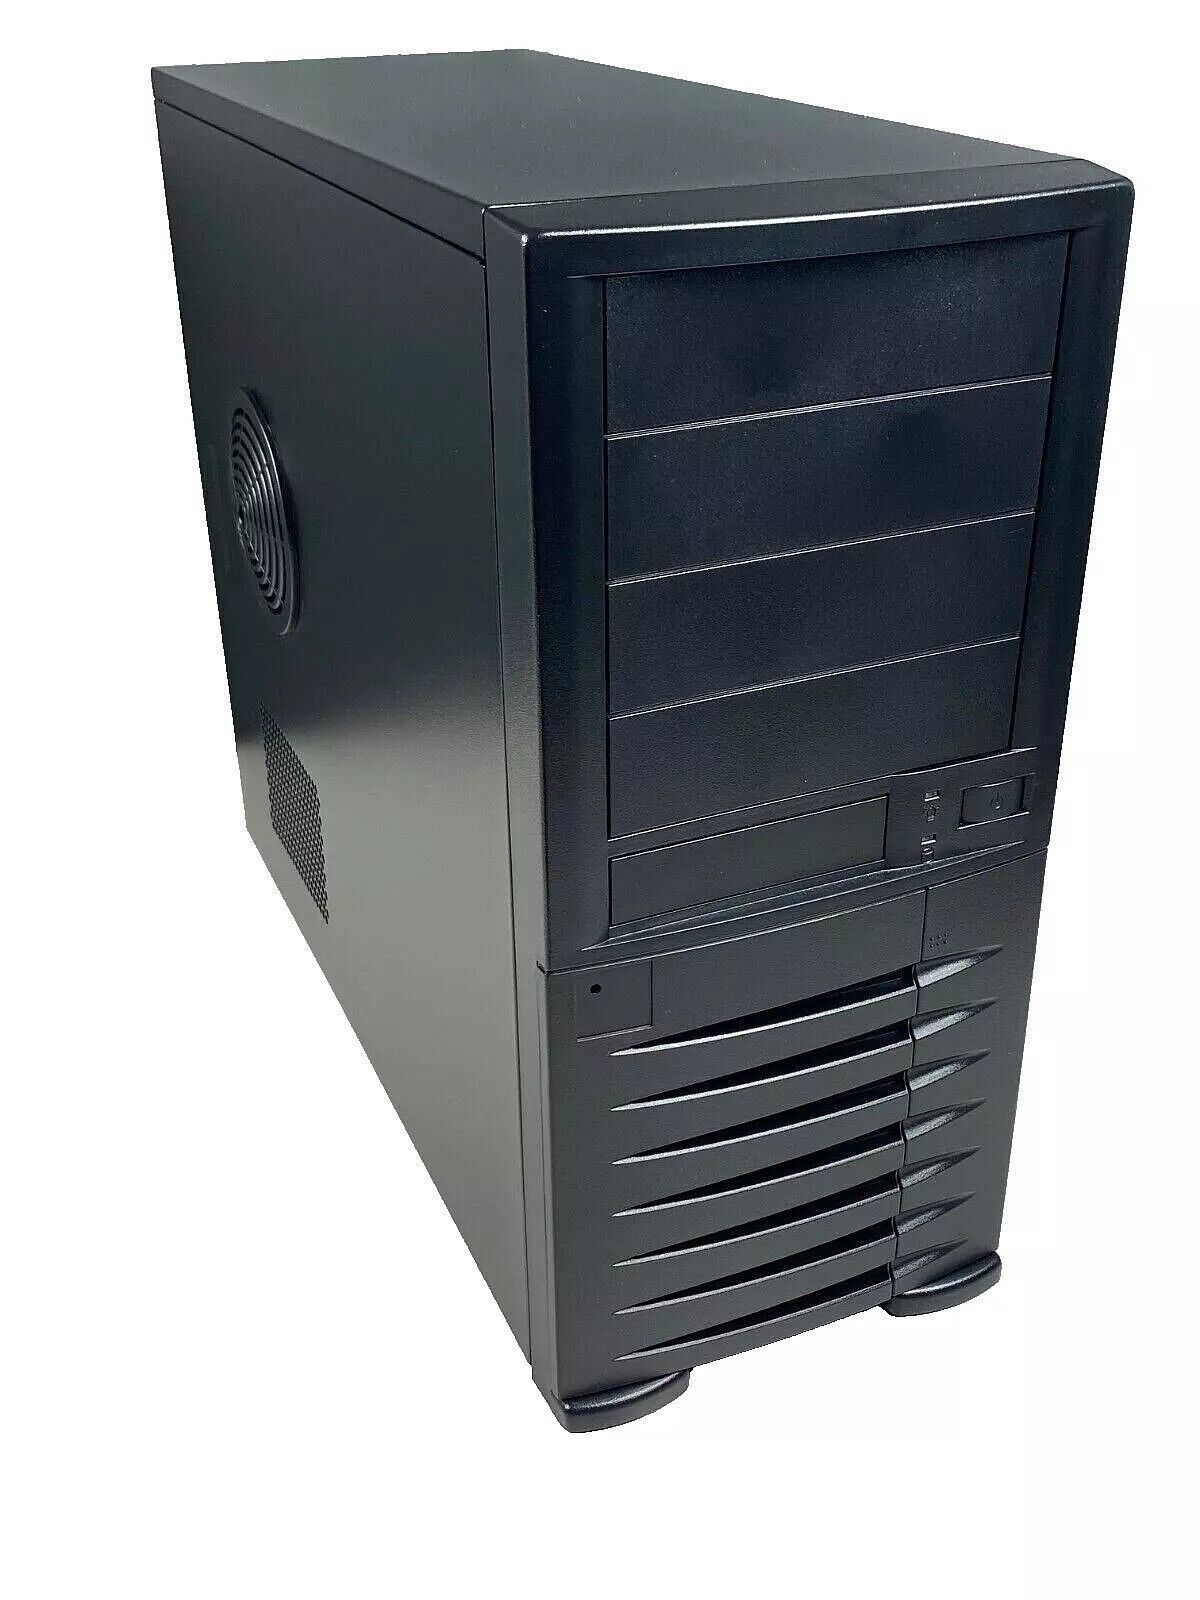 Chenbro PC61169-BK-H Server Tower Chassis Full ATX Case New Open Box